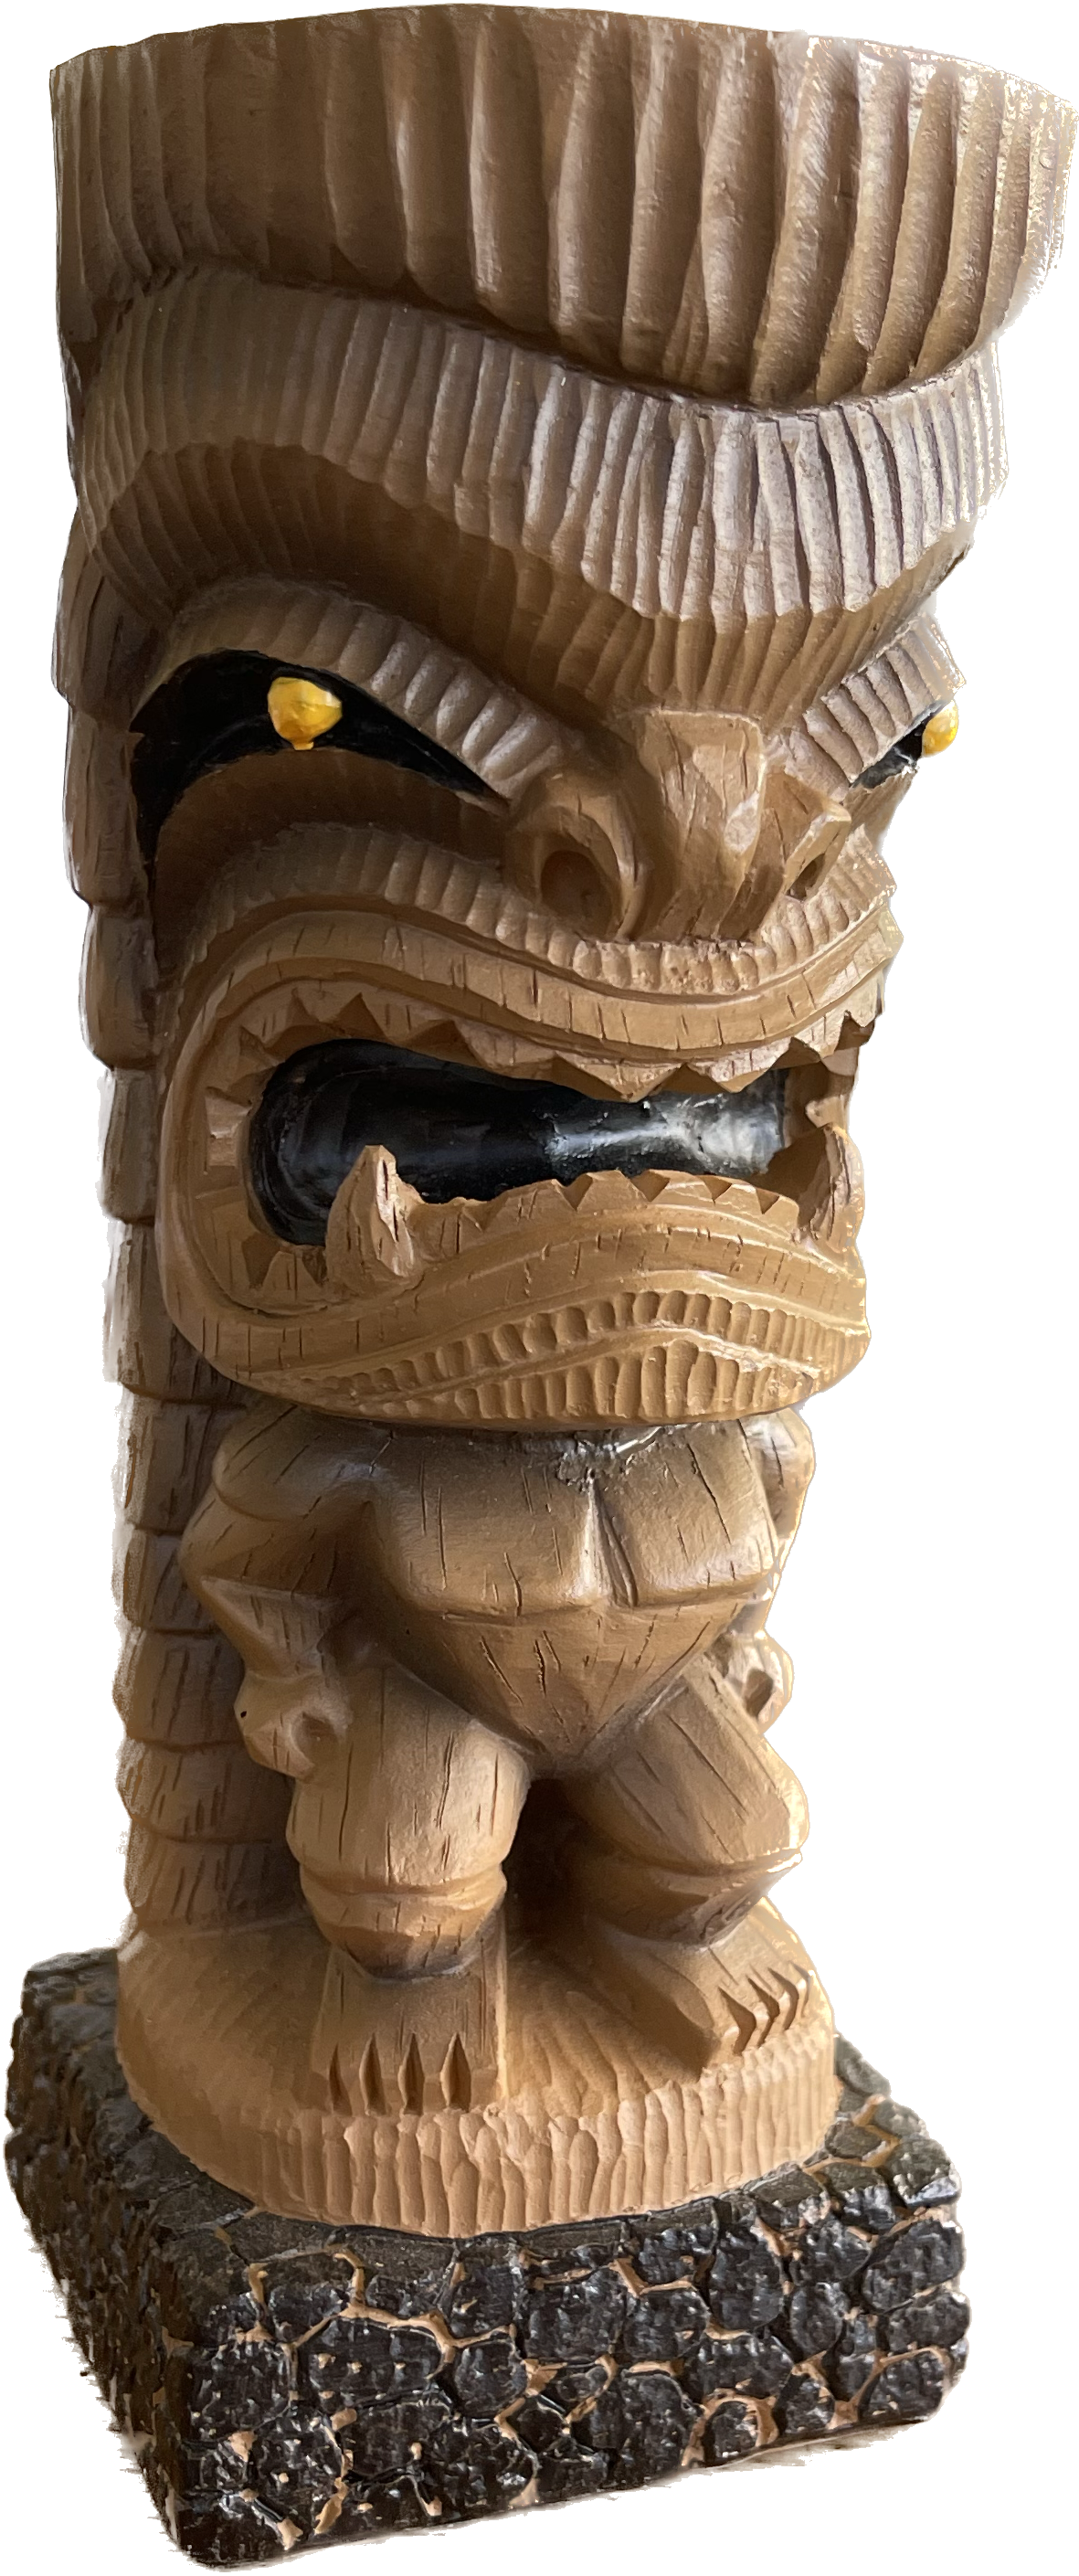 Protection Tiki Statue from Pineapple Man Comic Signed by Sam Campos